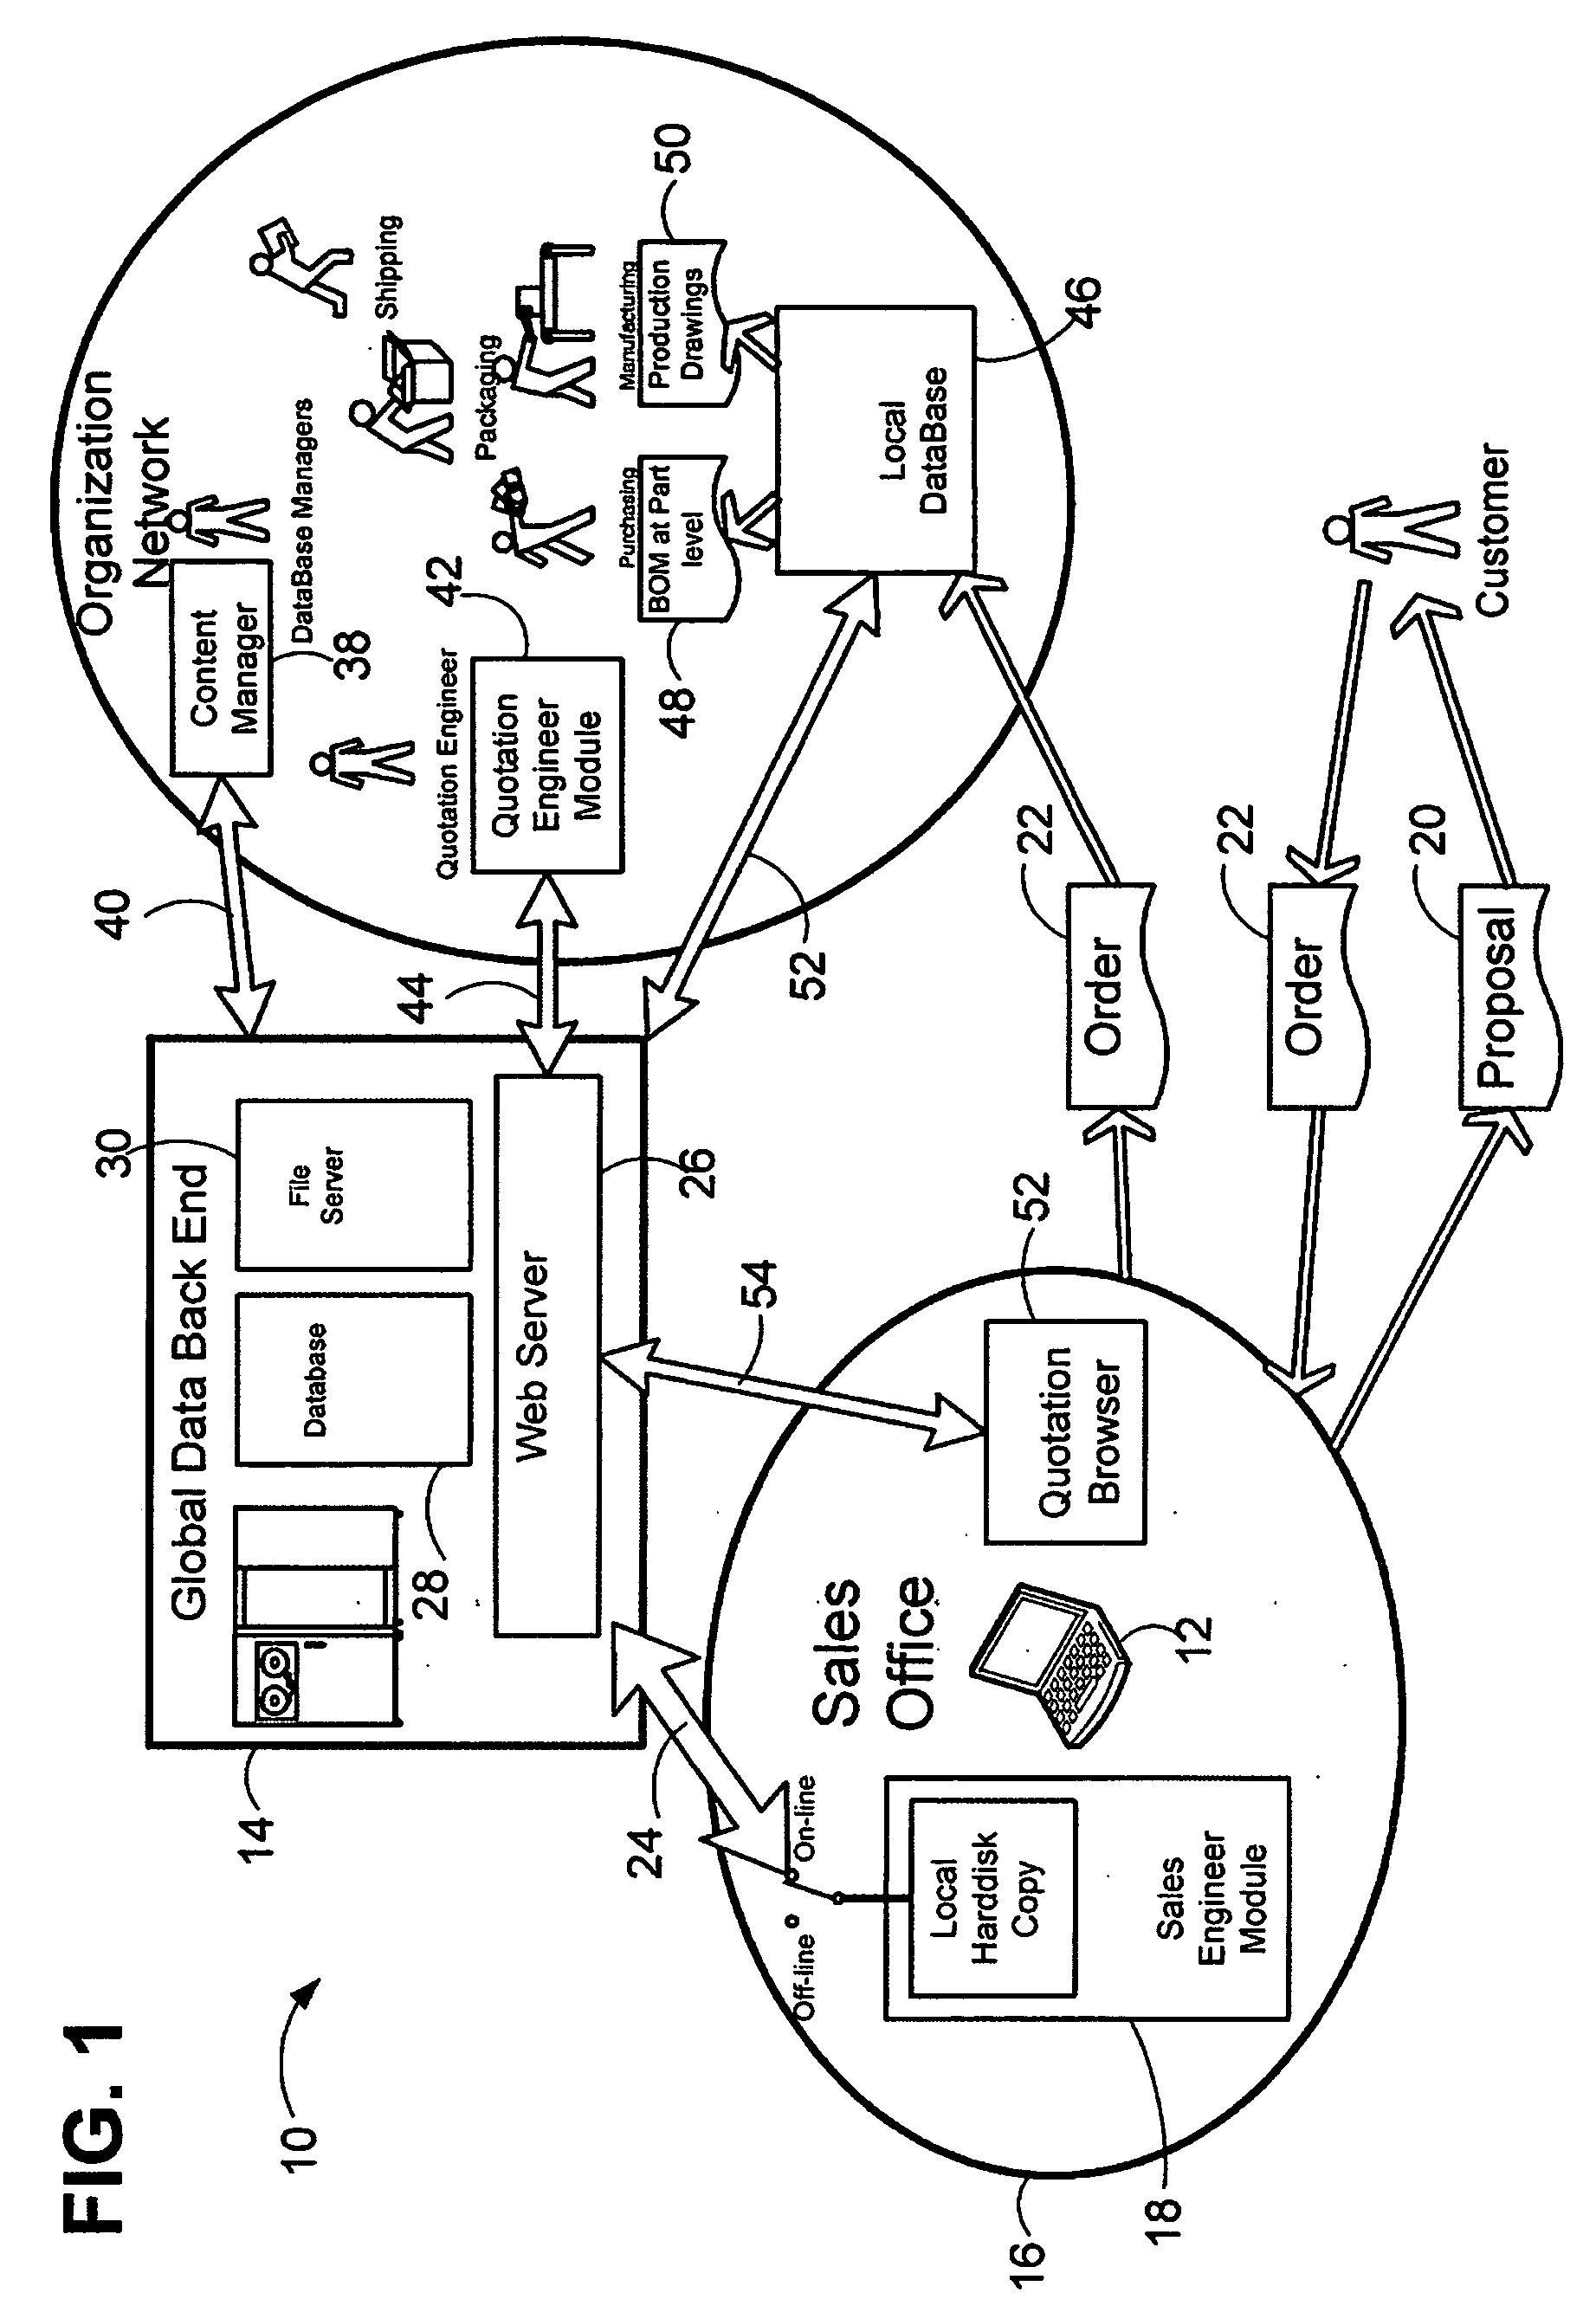 System and method for intelligent product configuration and price quotation